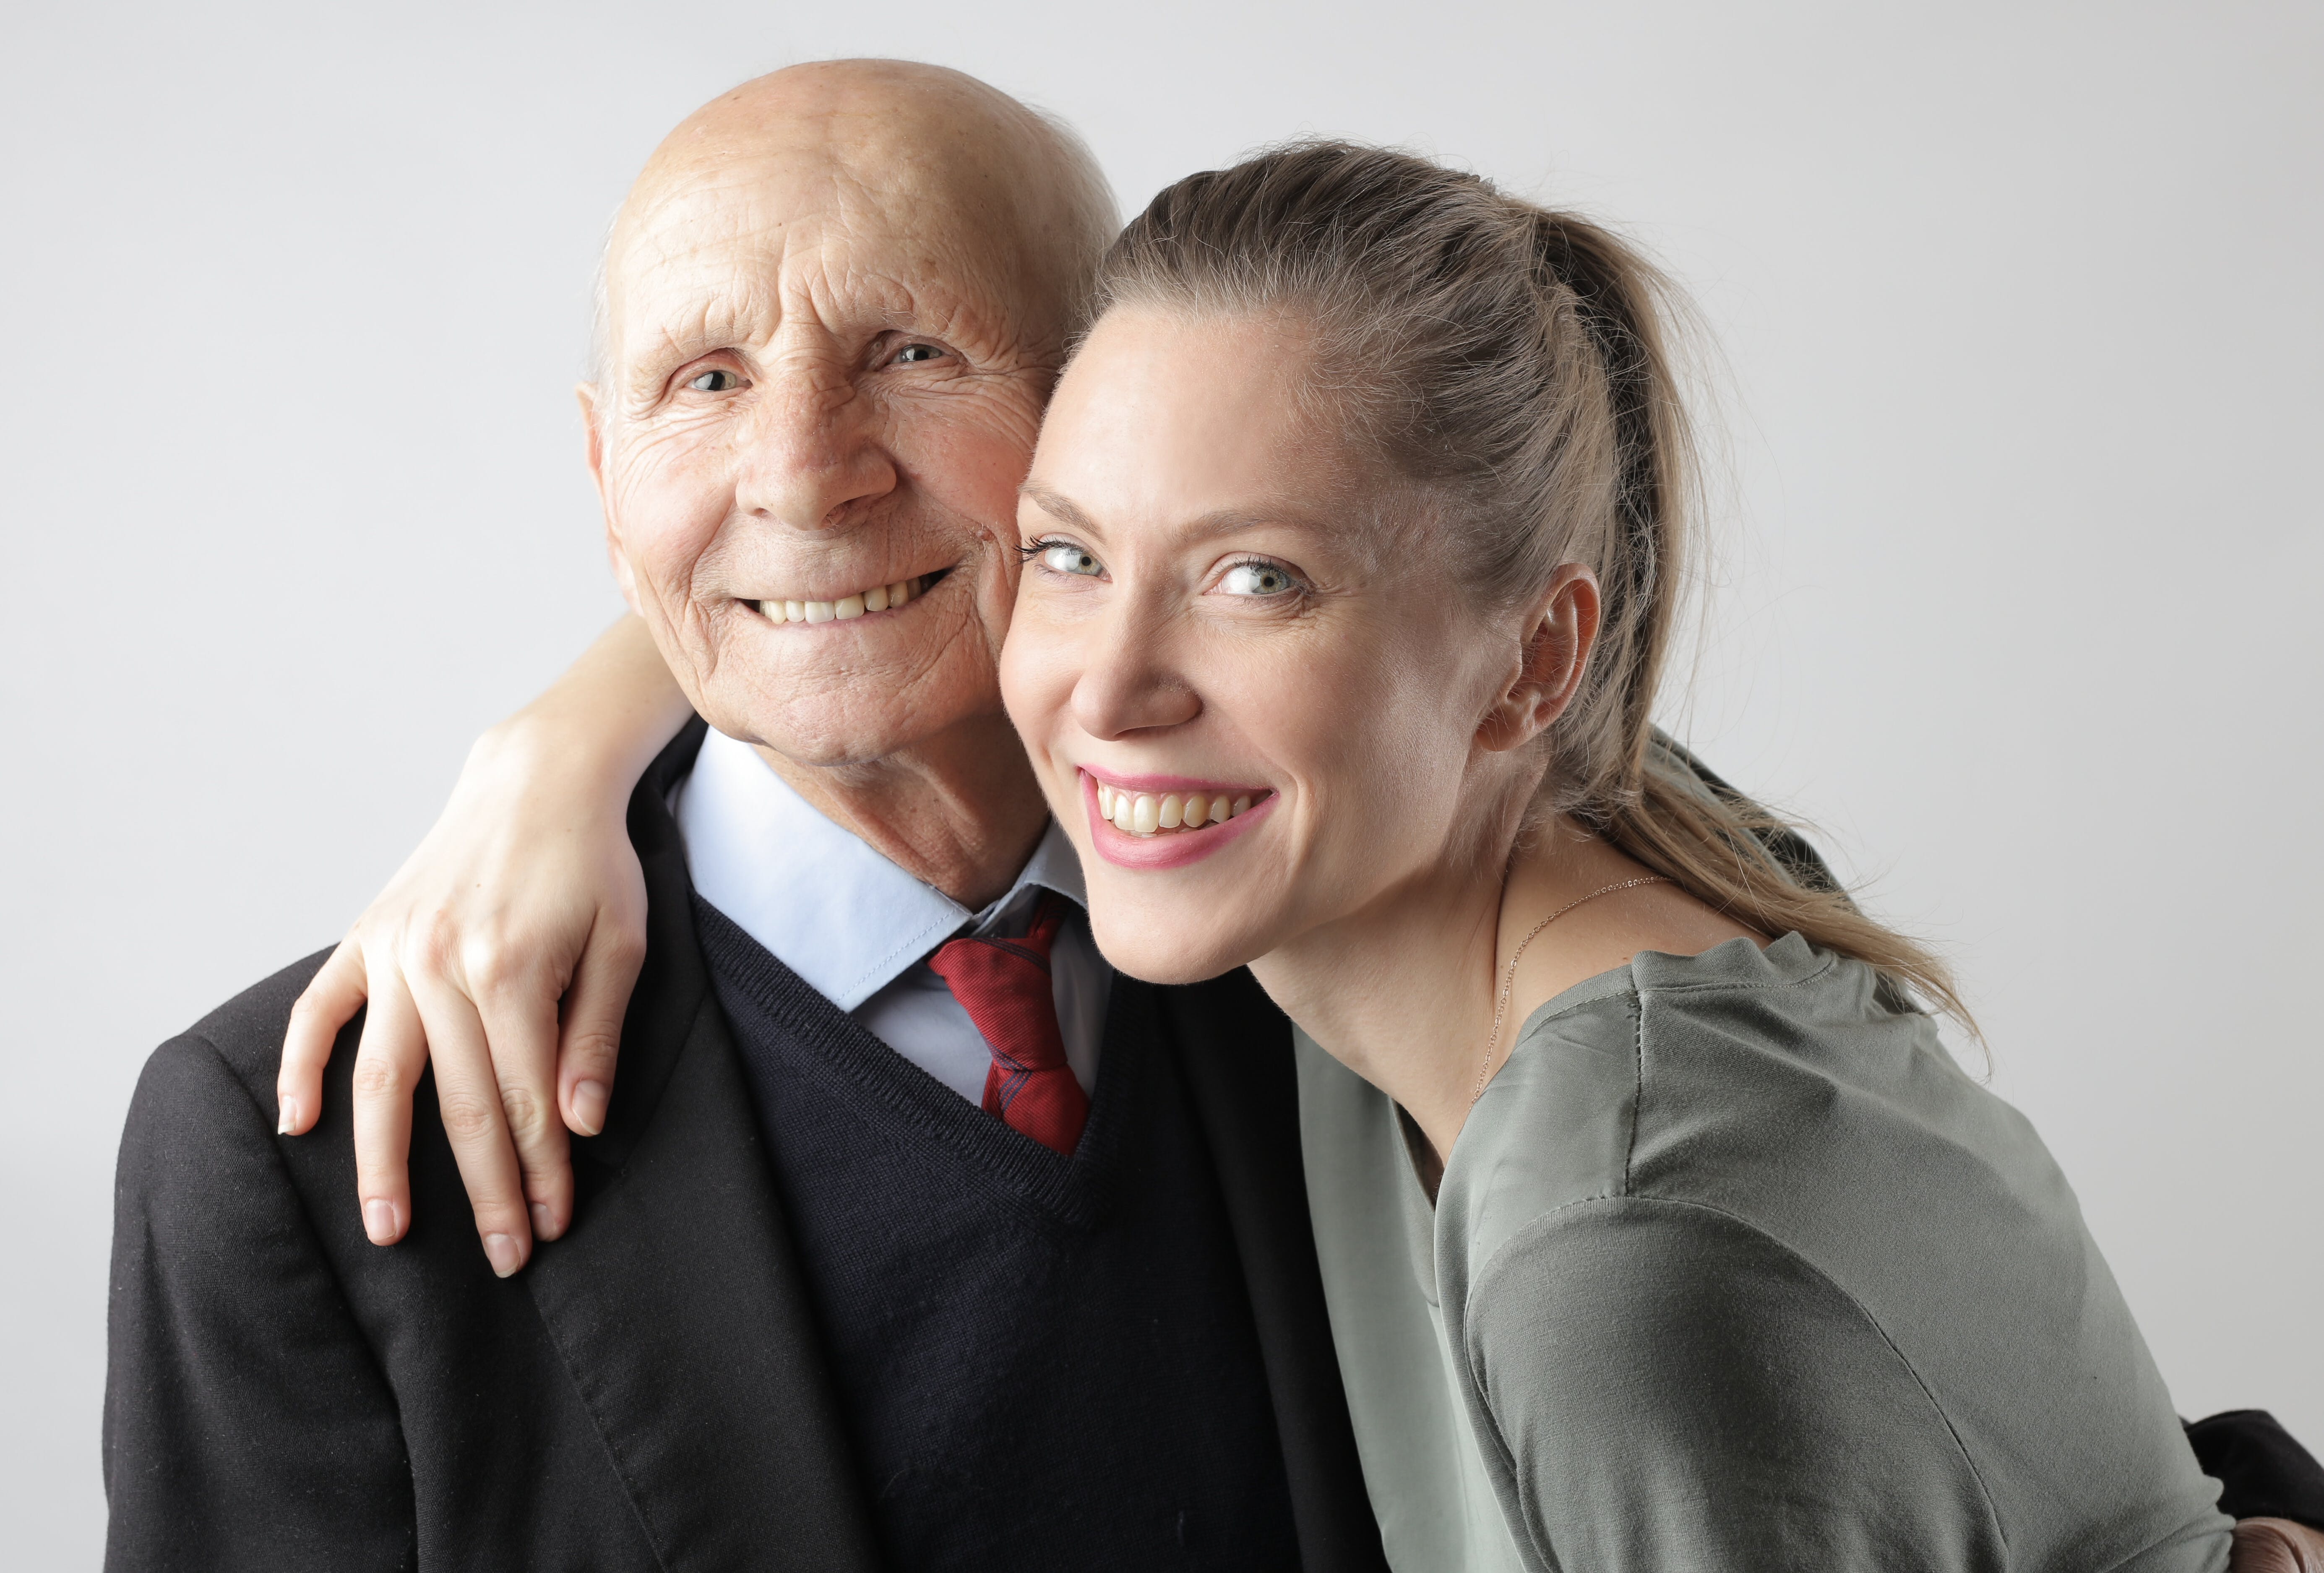 An elderly man and a young woman posing for a portrait | Source: Pexels